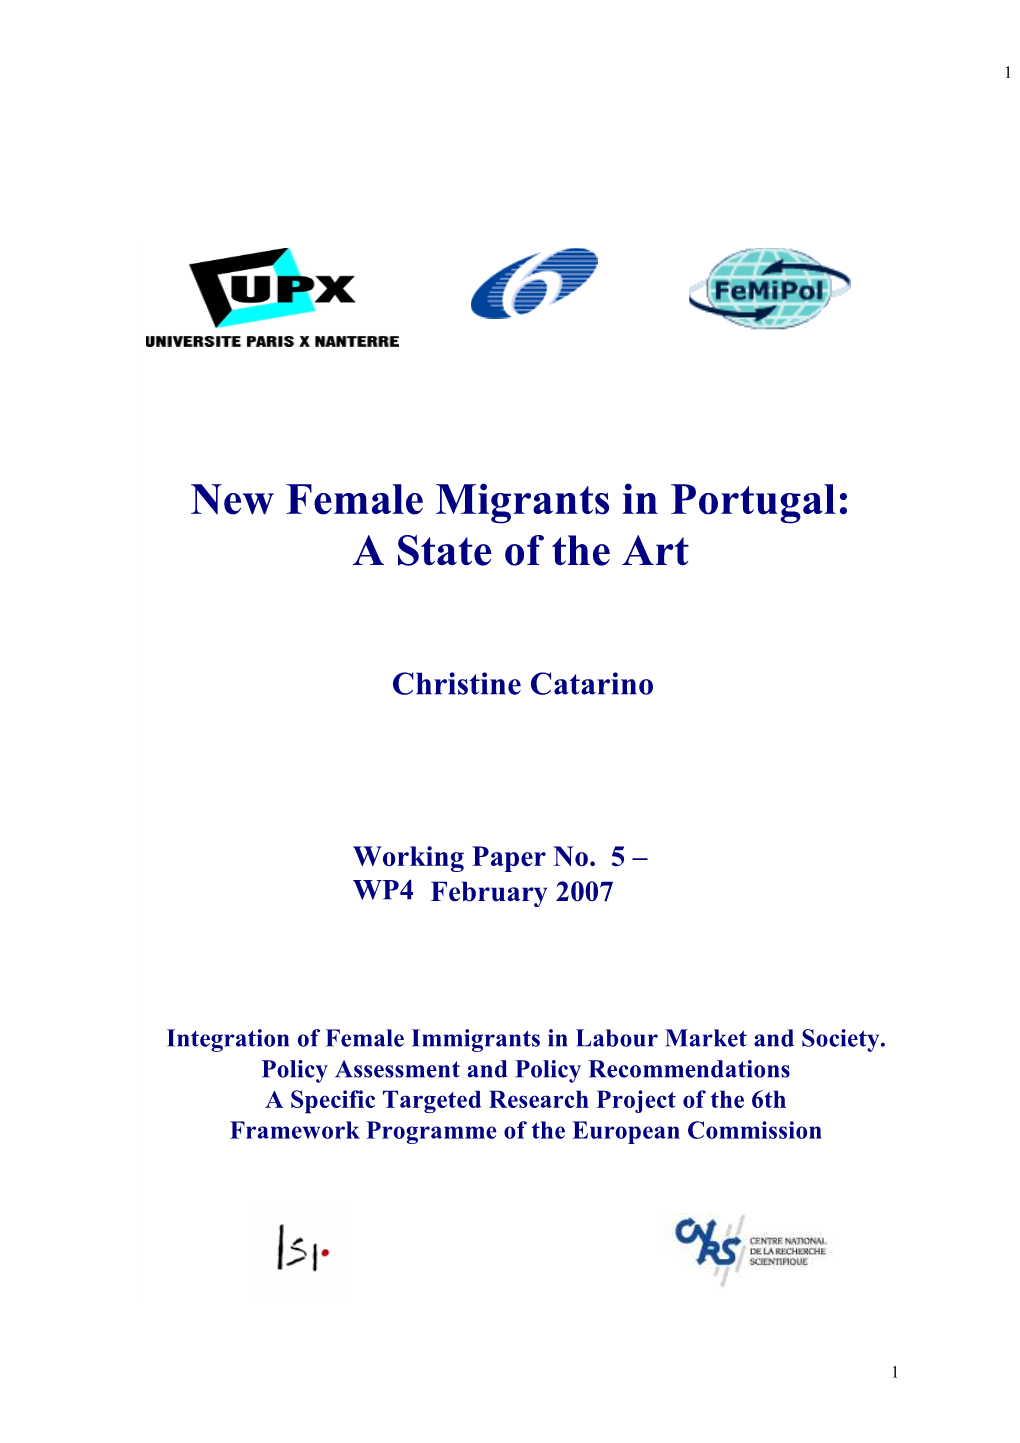 New Female Migrants in Portugal: a State of The